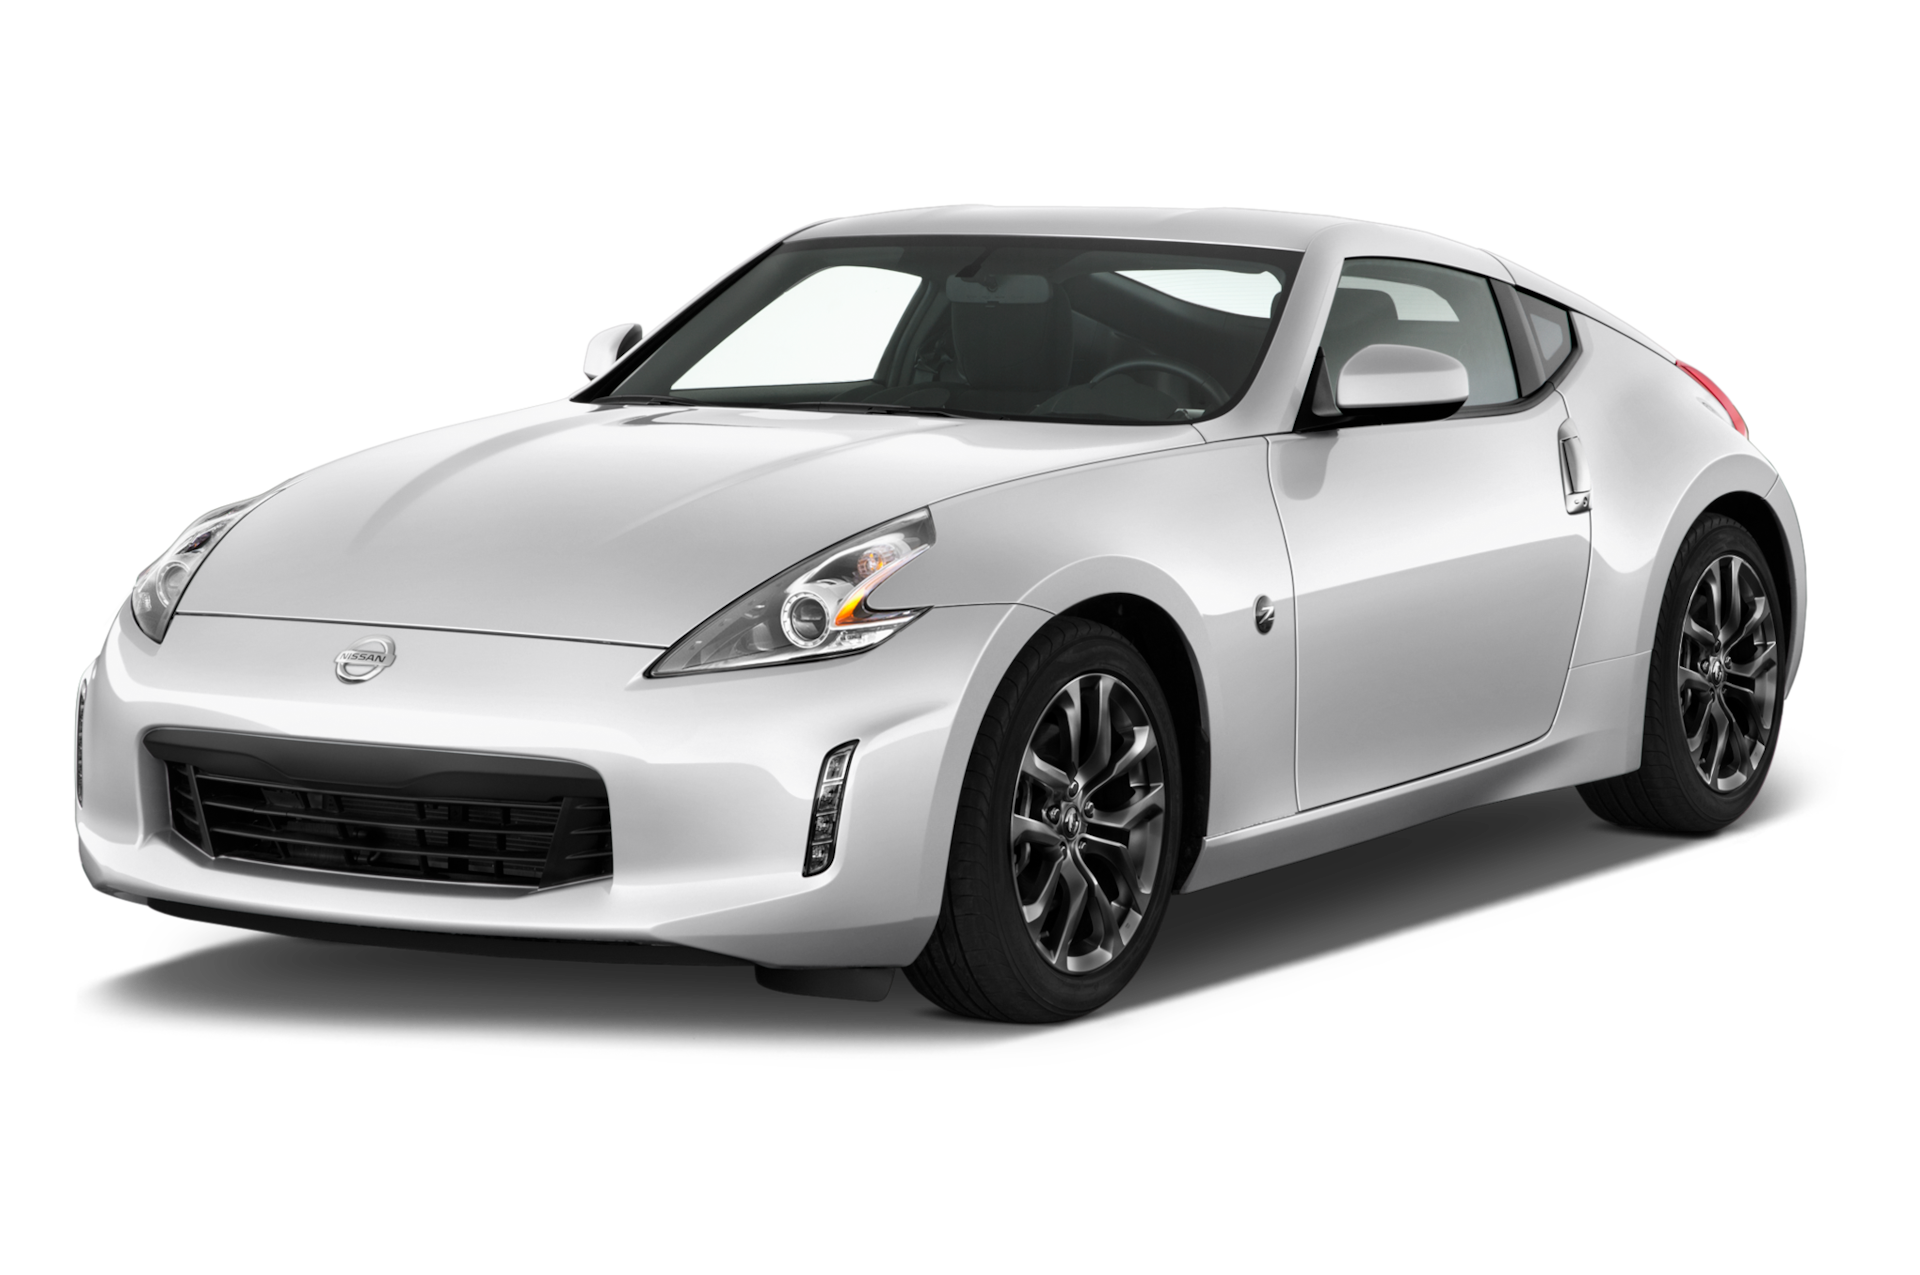 2020 Nissan 370Z Prices, Reviews, and Photos - MotorTrend